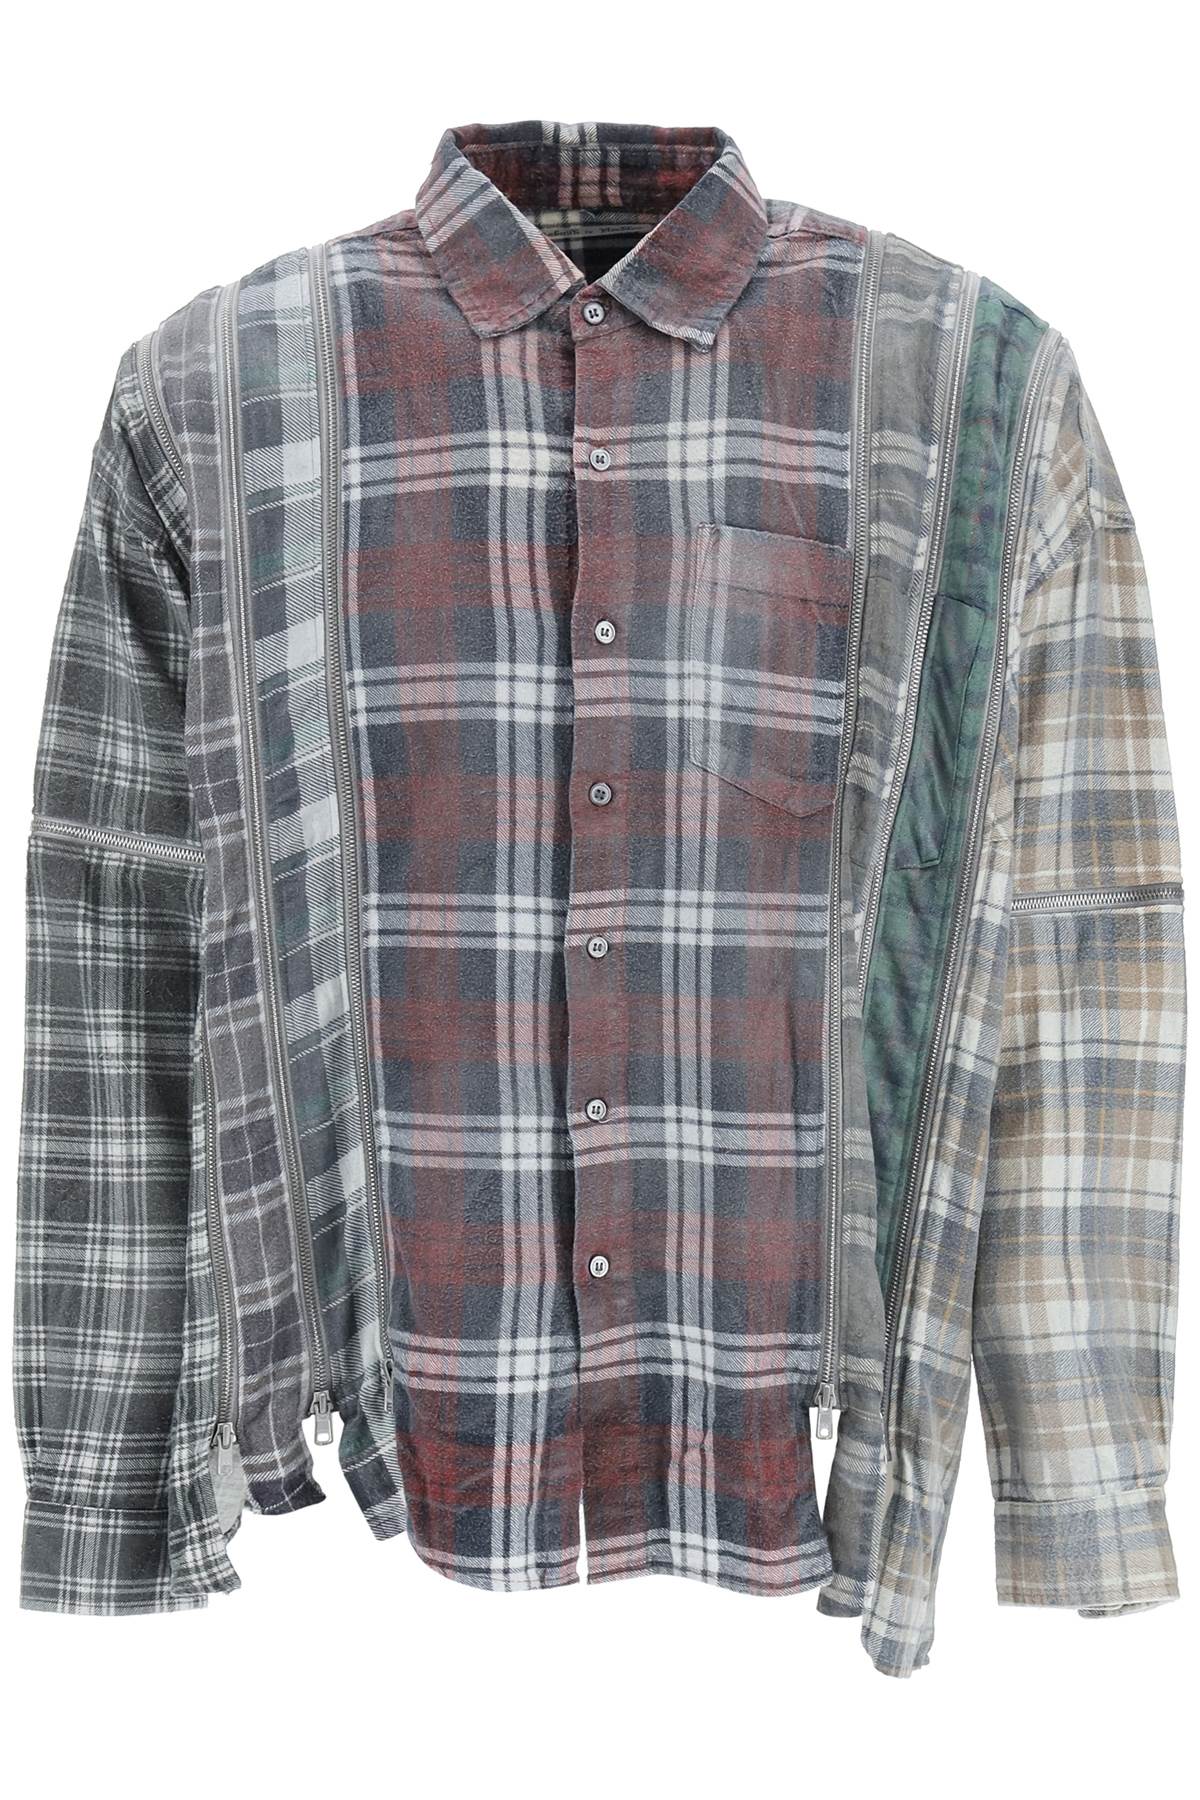 Needles rebuild Patchwork Flannel Shirt With Zippers